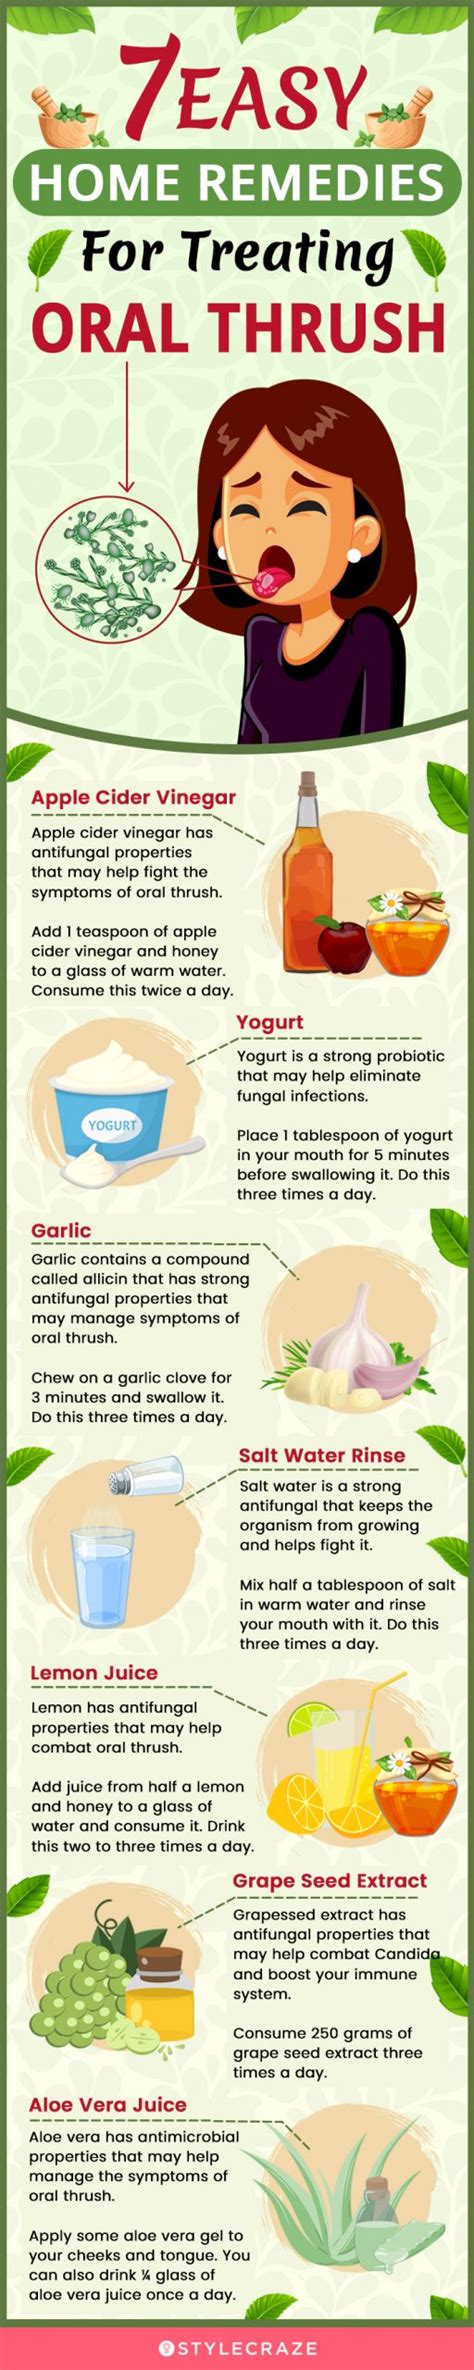 15 Effective Home Remedies For Oral Thrush